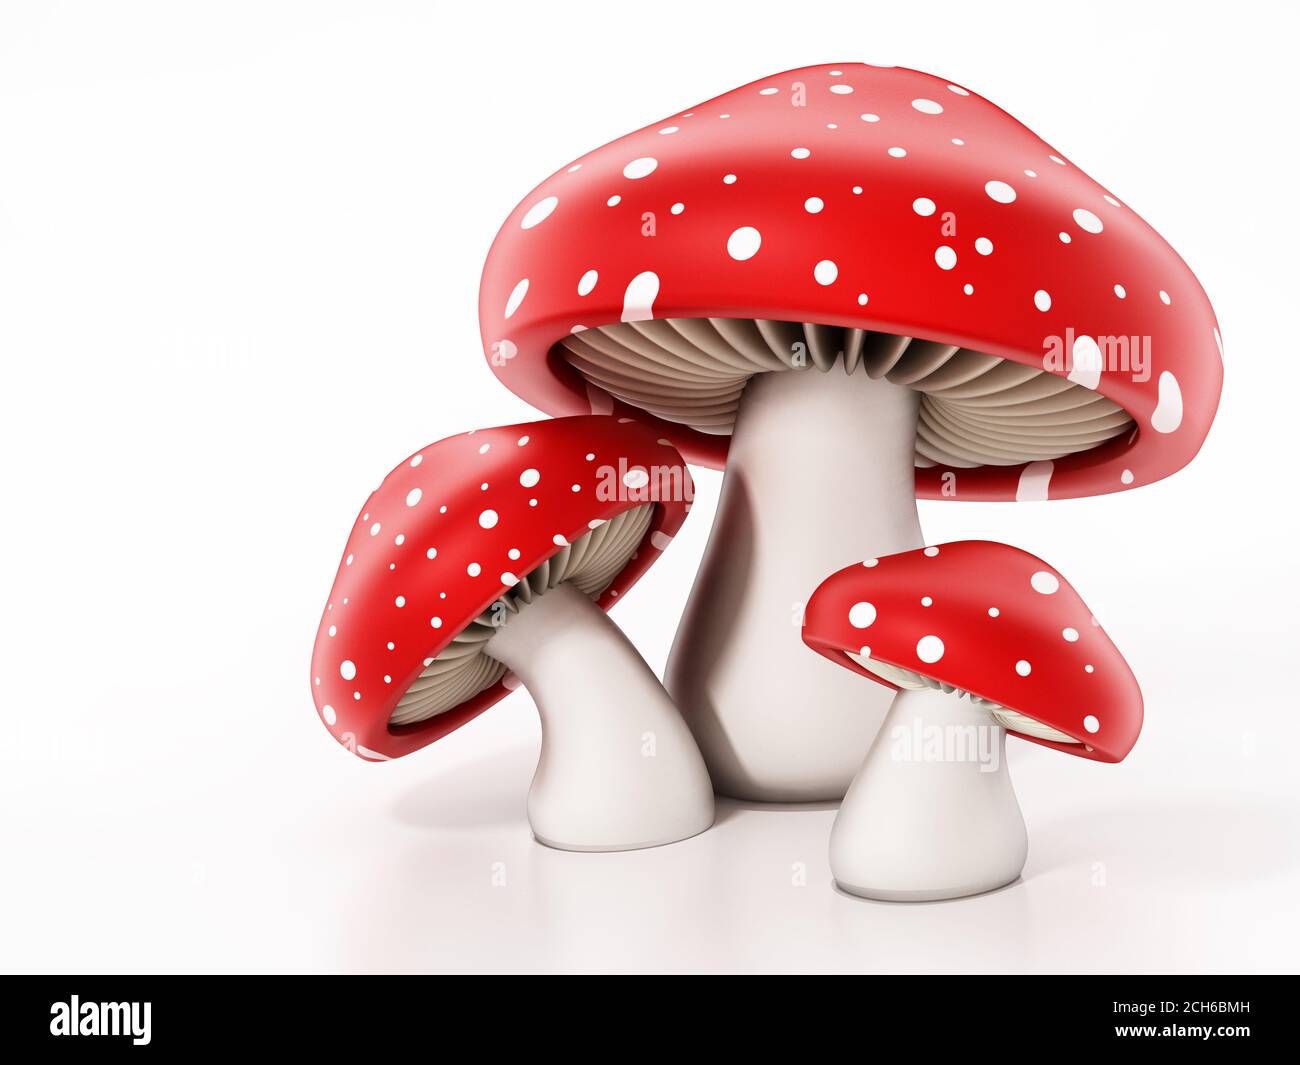 Red and white wild mushrooms isolated on white background. 3D illustration. Stock Photo